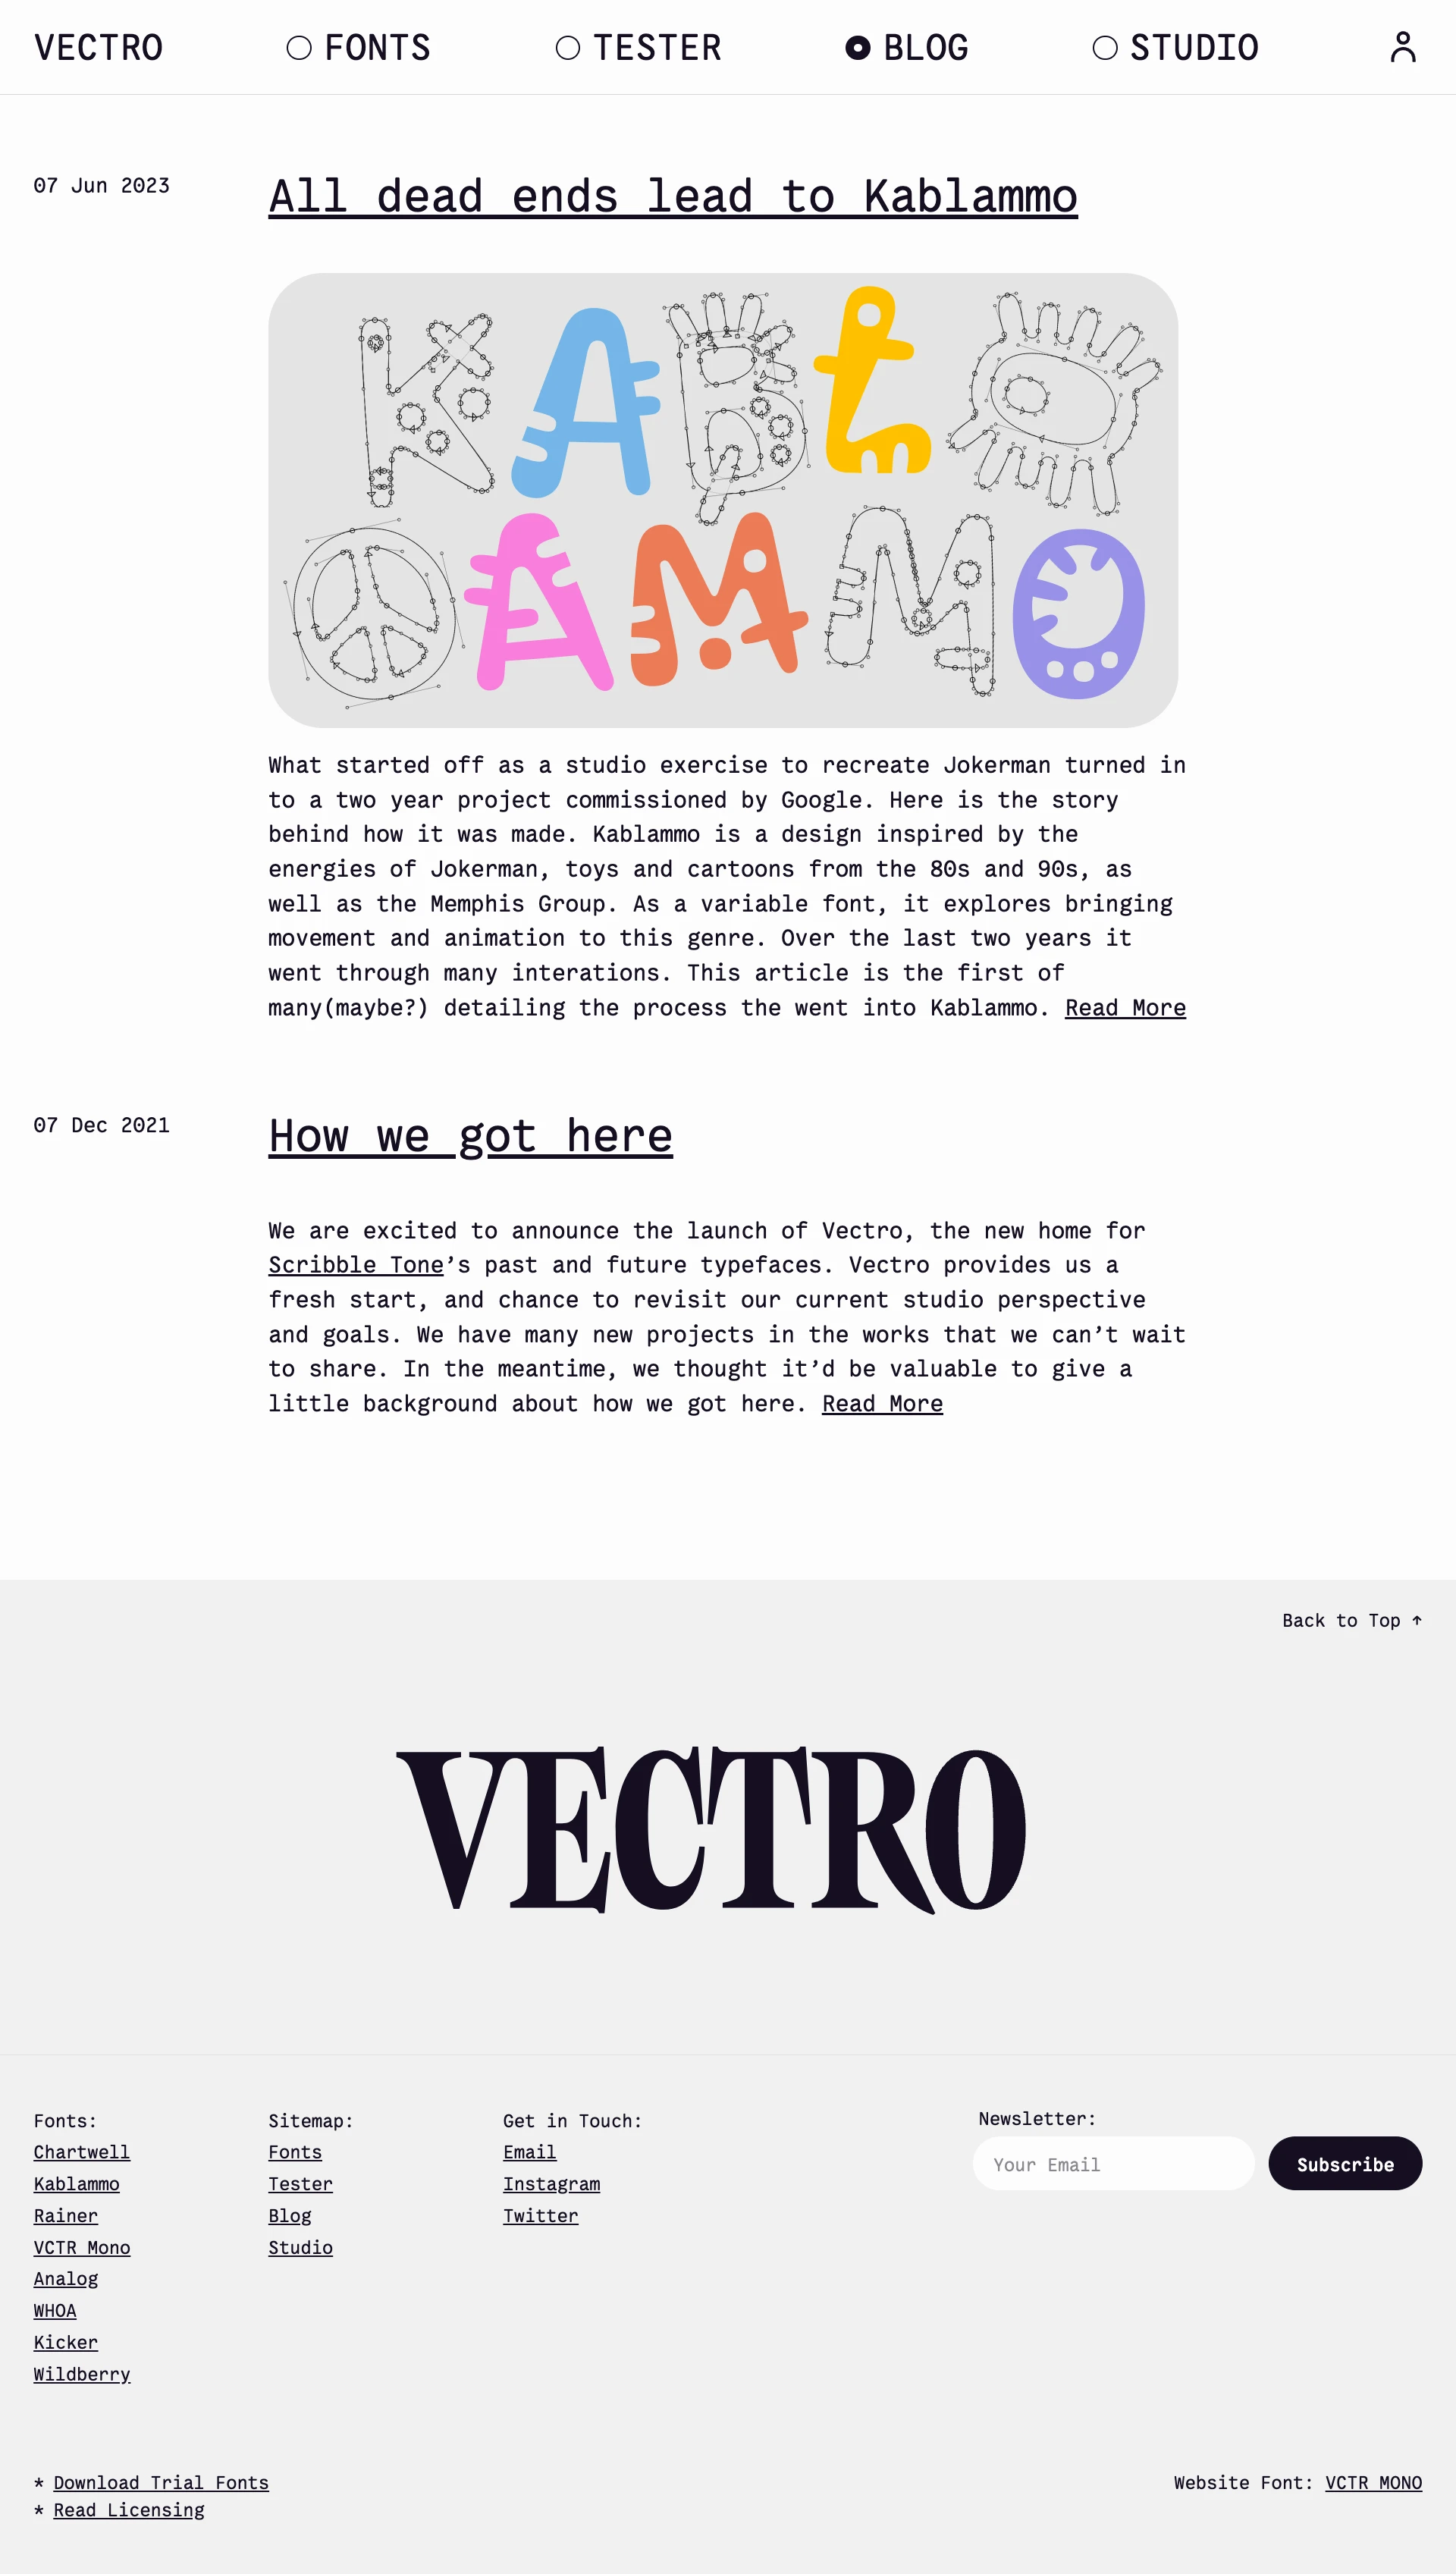 Vectro Landing Page Example: Vectro is a type design studio that offers retail fonts, custom typeface design, and font production services. Vectro’s work explores intersections of technology, utility, and playfulness. Based in Portland, Oregon, Vectro was founded in 2021 by Travis Kochel and Lizy Gershenzon. The two have been design partners for over 10 years founding companies such as Future Fonts and the design studio Scribble Tone.